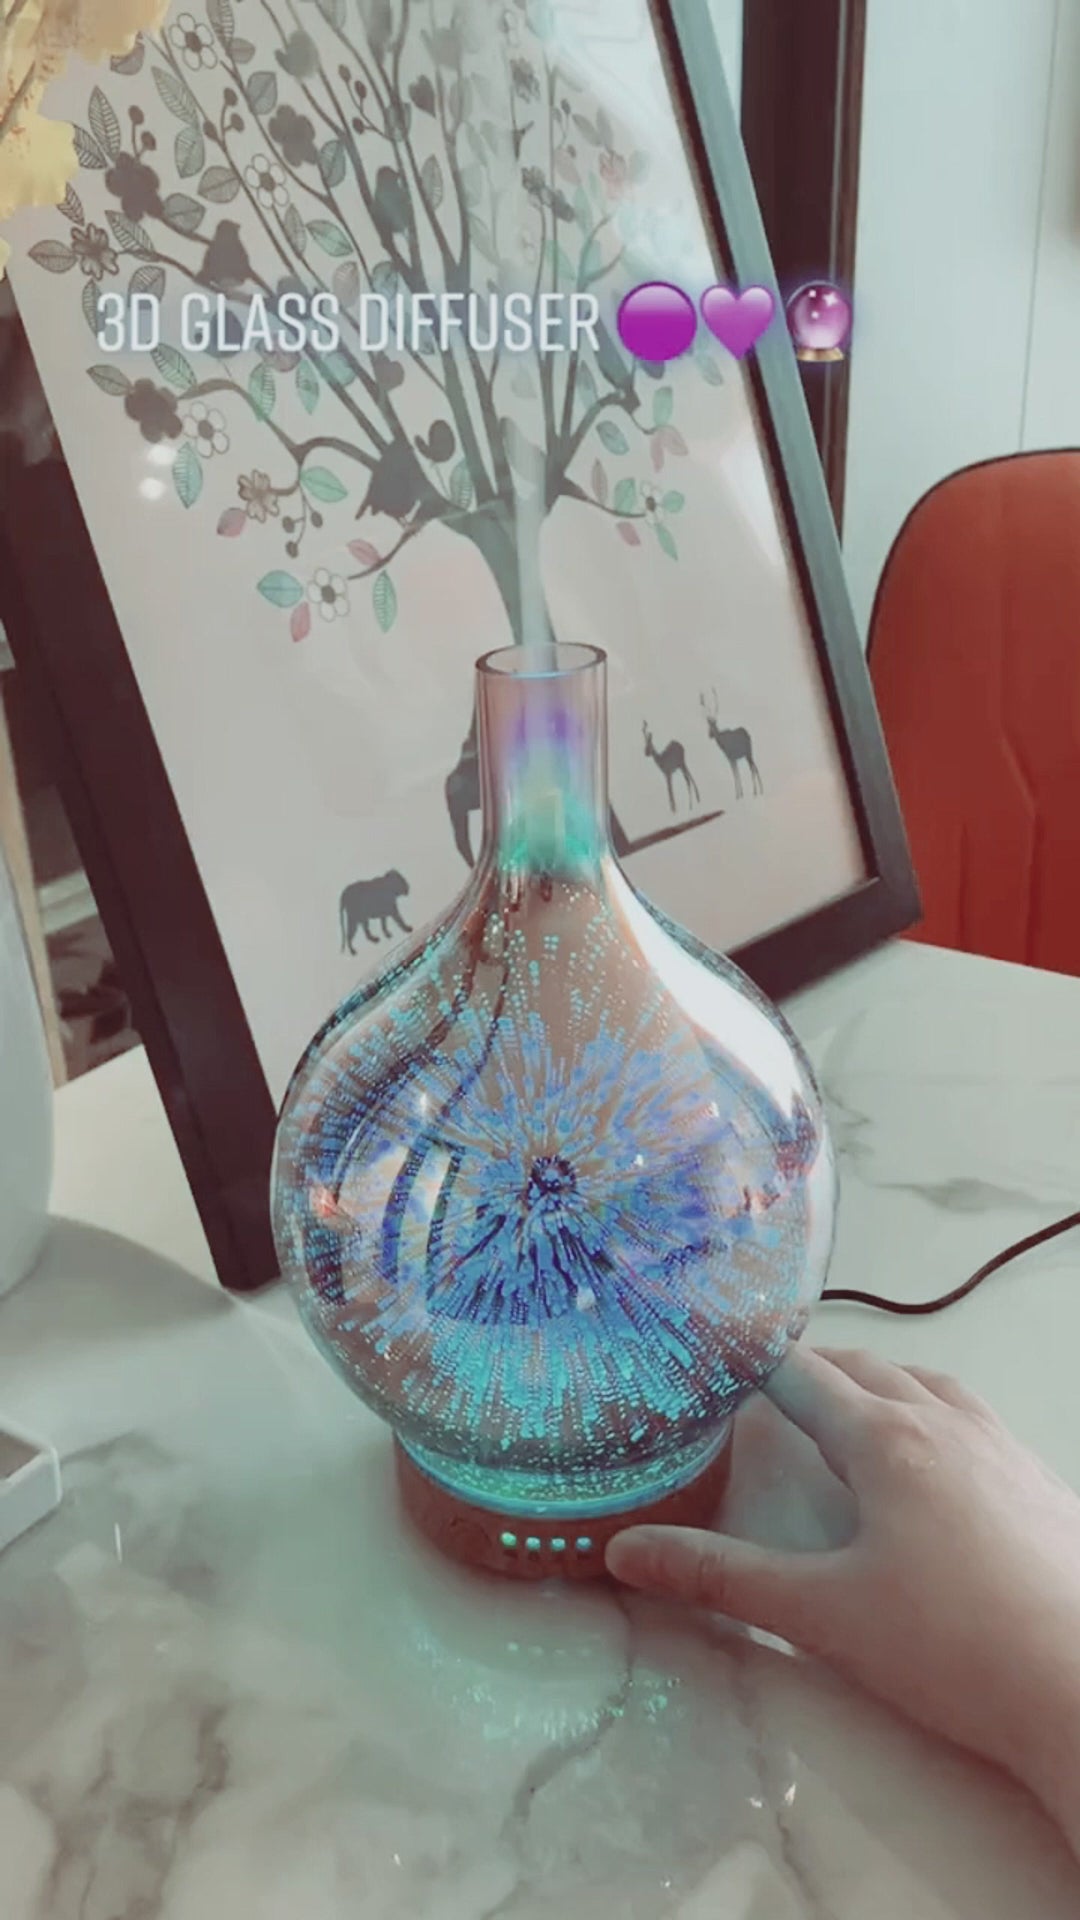 Video Presentation of Celestial Fireworks 3D Aromatherapy Diffuser